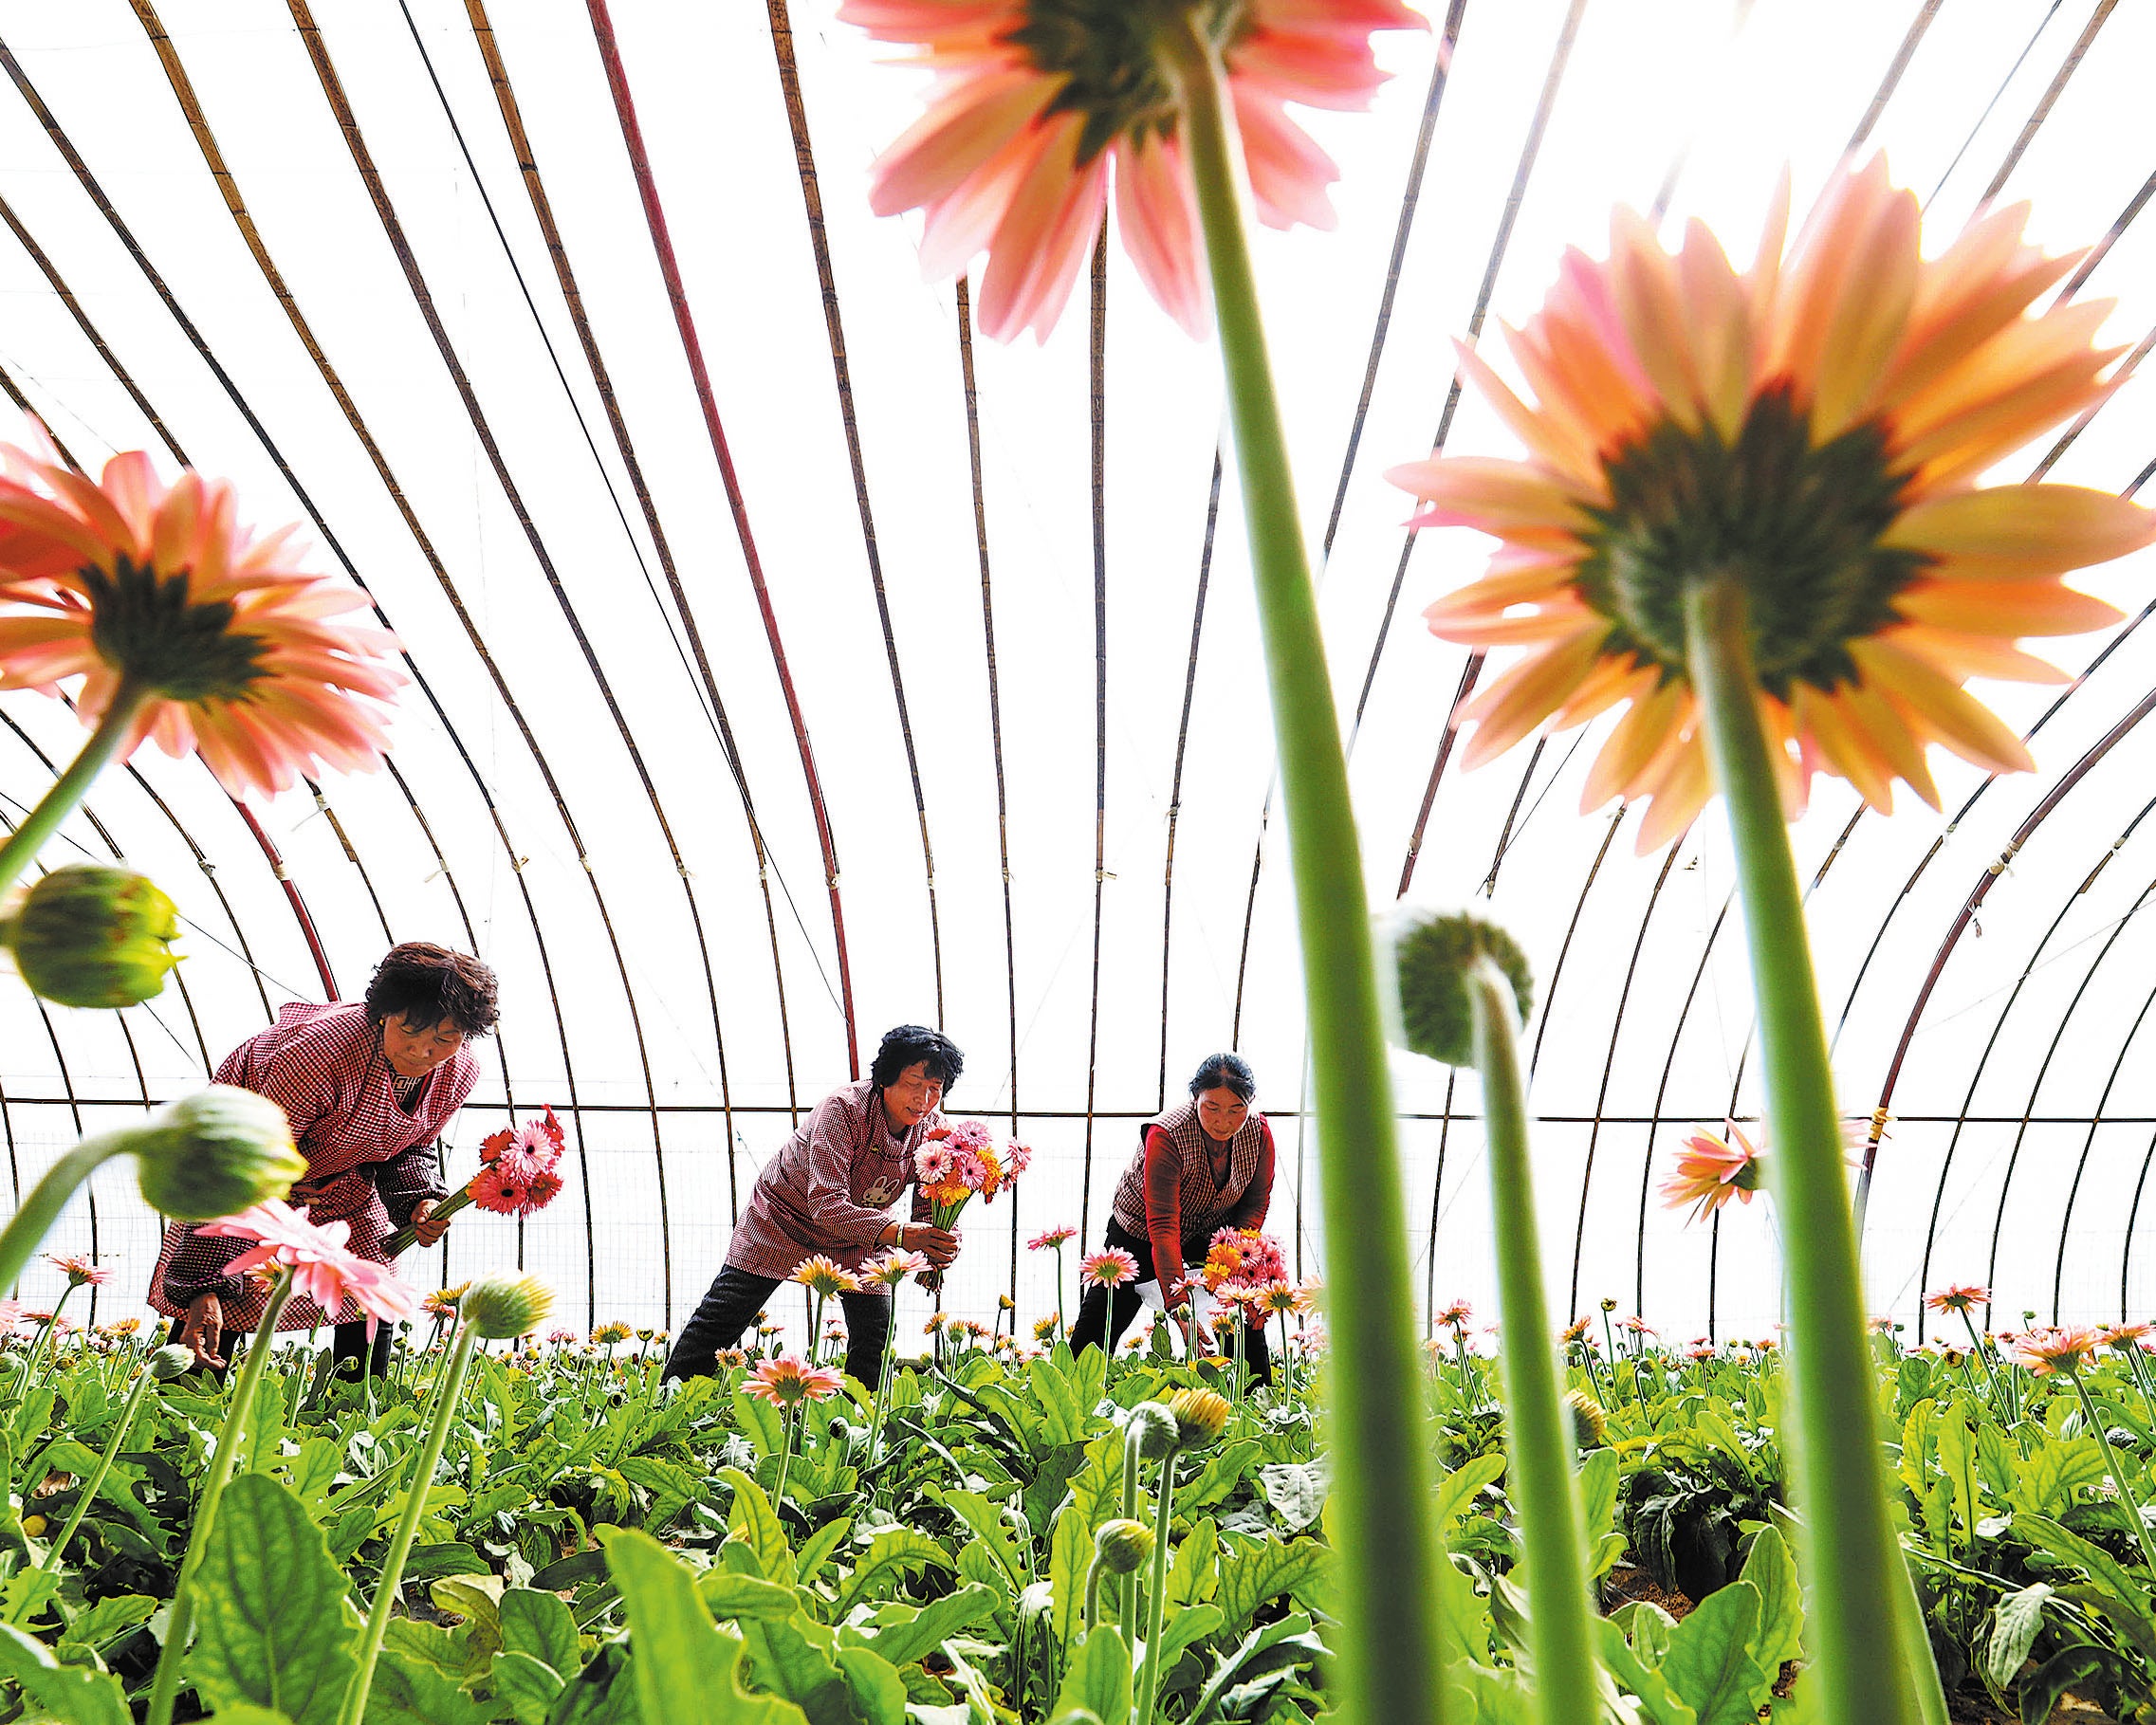 Growers cut fresh flowers at a plantation base in Zhangye, Gansu province, in March